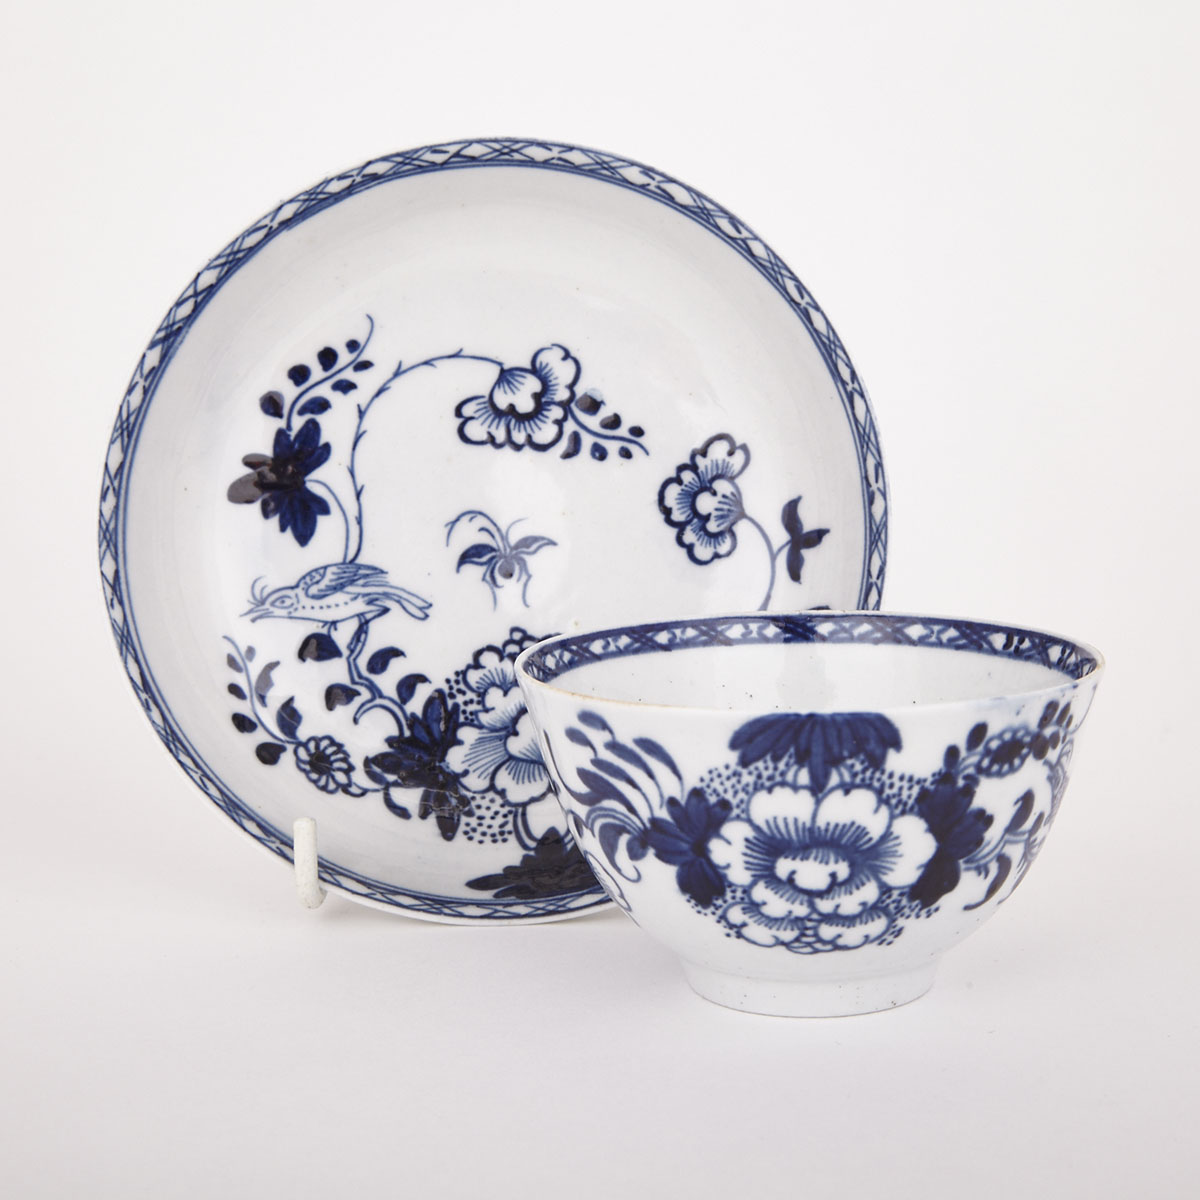 Liverpool ‘Bird on Branch’ Pattern Tea Bowl and Saucer, c.1760-80